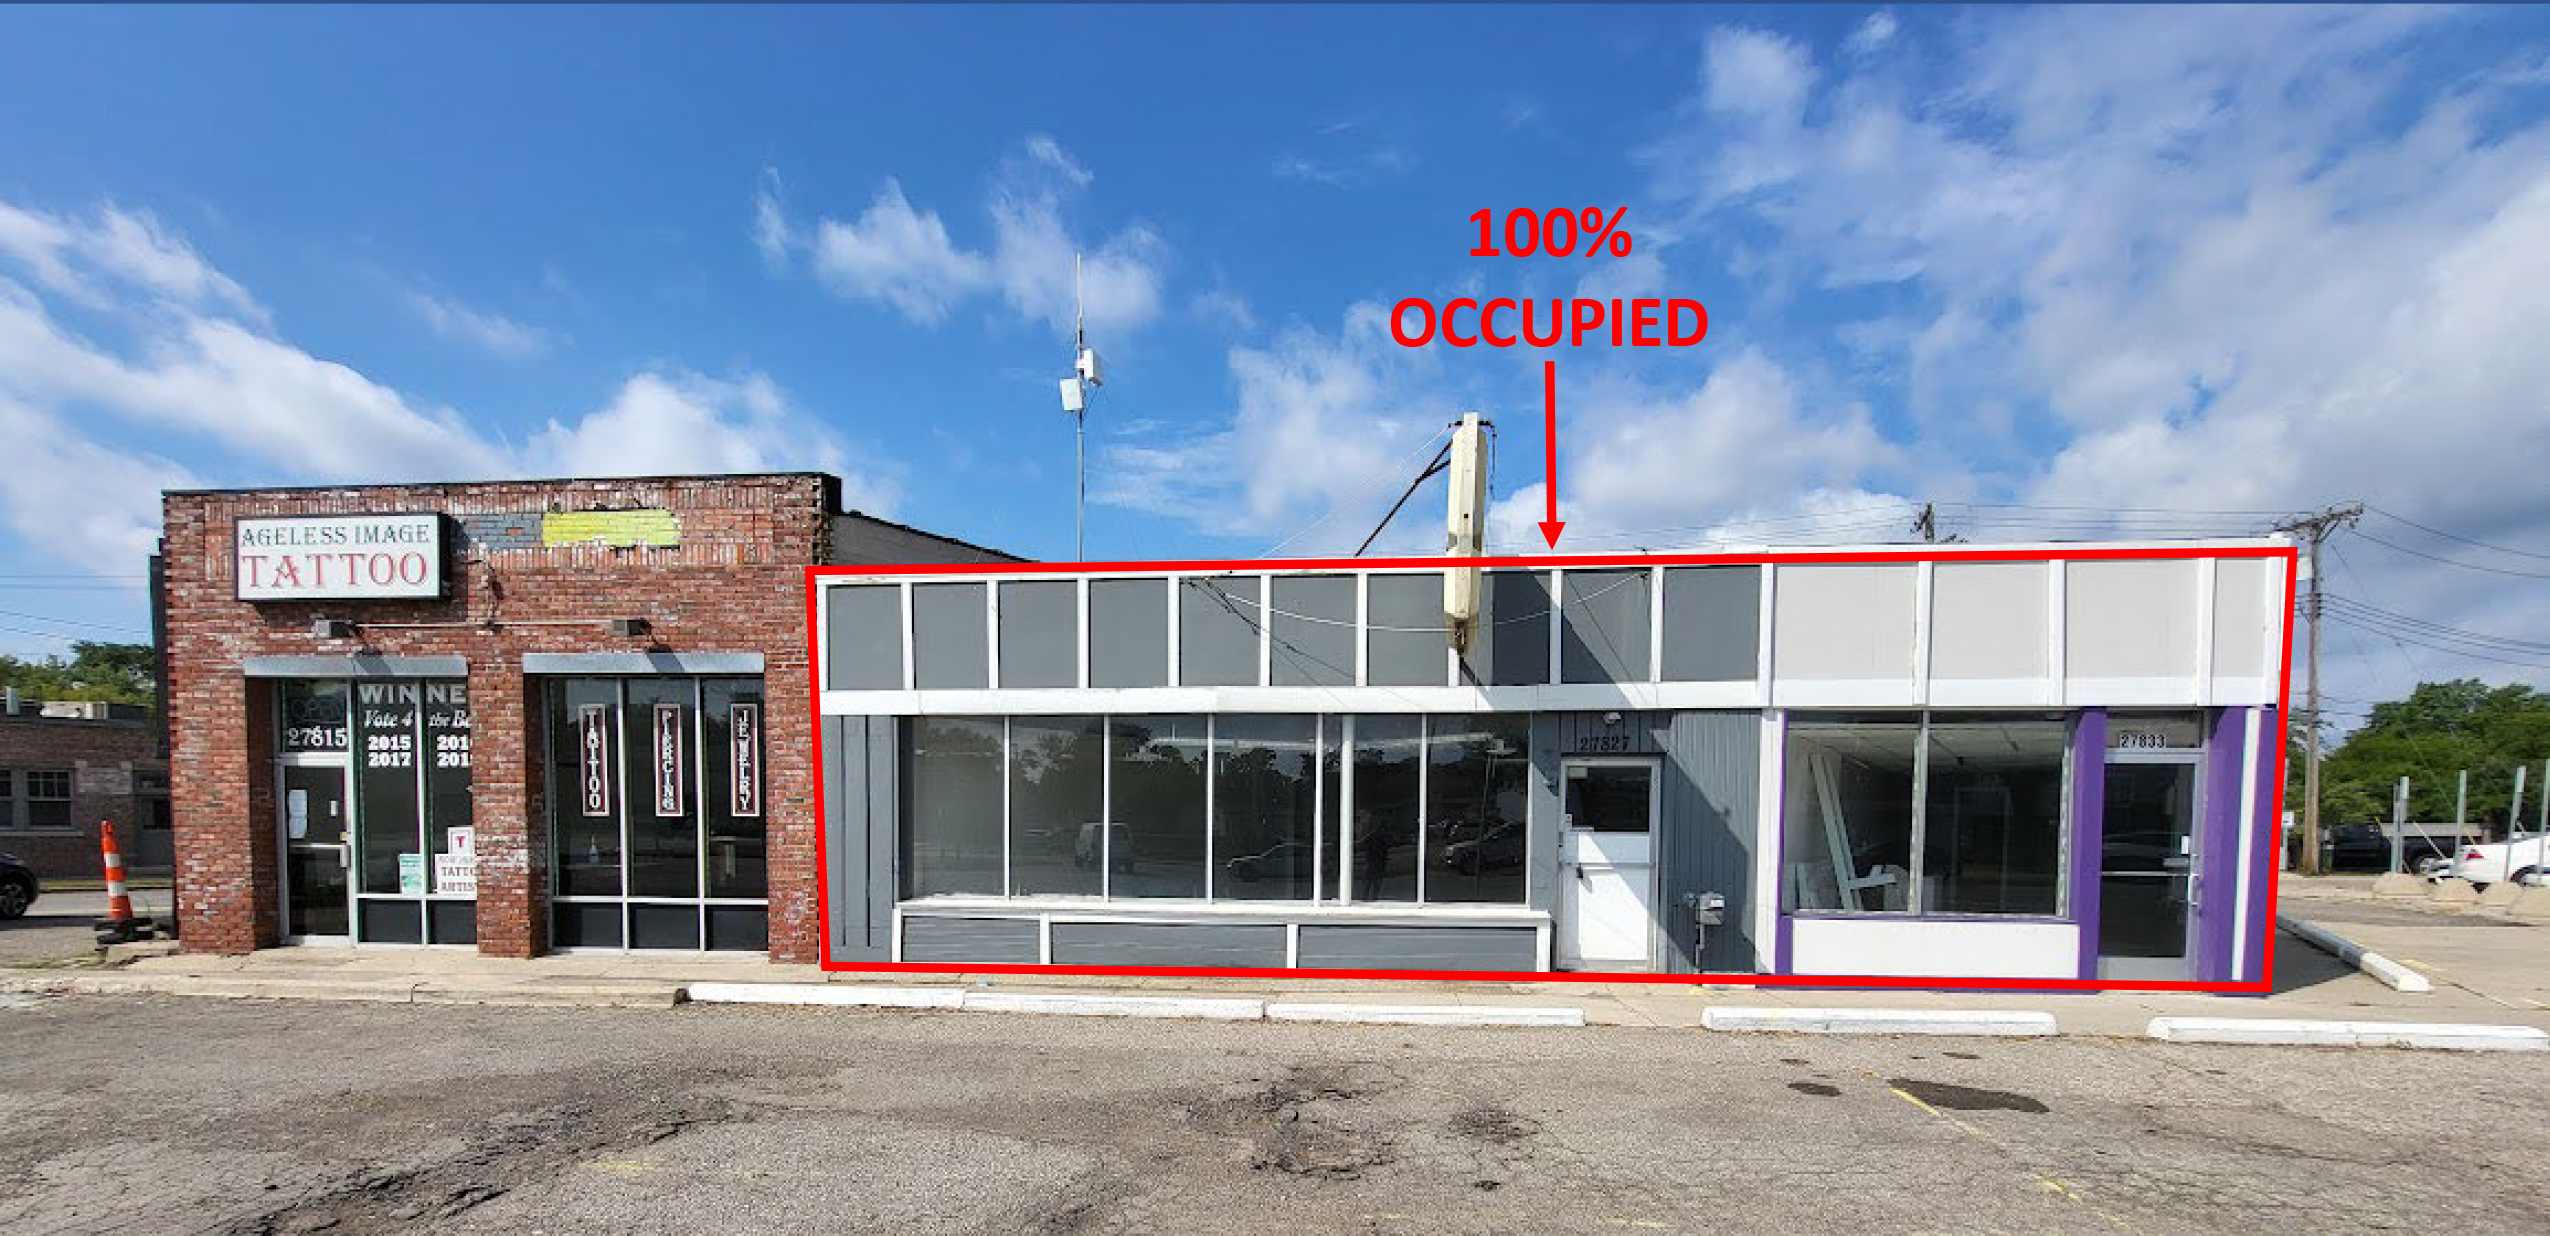 27827 Woodward Ave, Berkley, Michigan 48072, ,Retail,For Sale,27827 Woodward Ave,1114